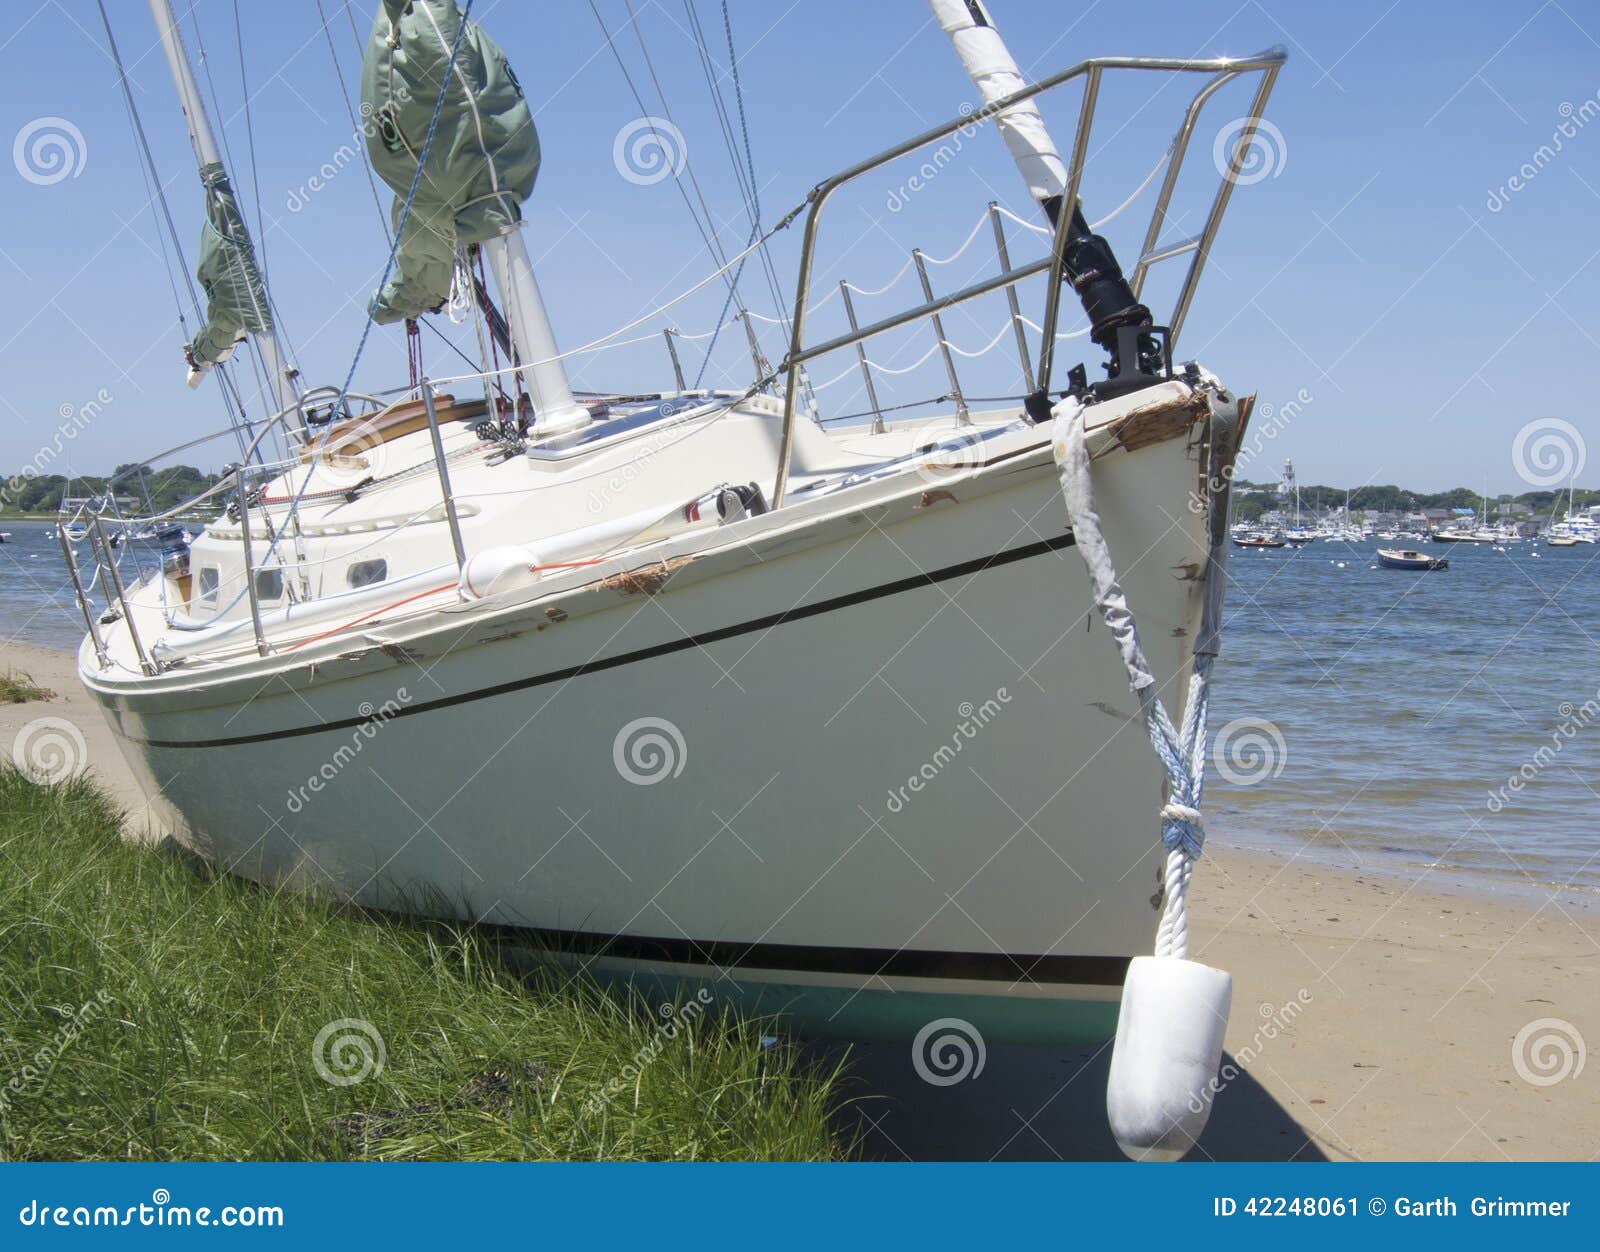 Damage on sailboat washed ashore on Nantucket by Hurricane Editorial 